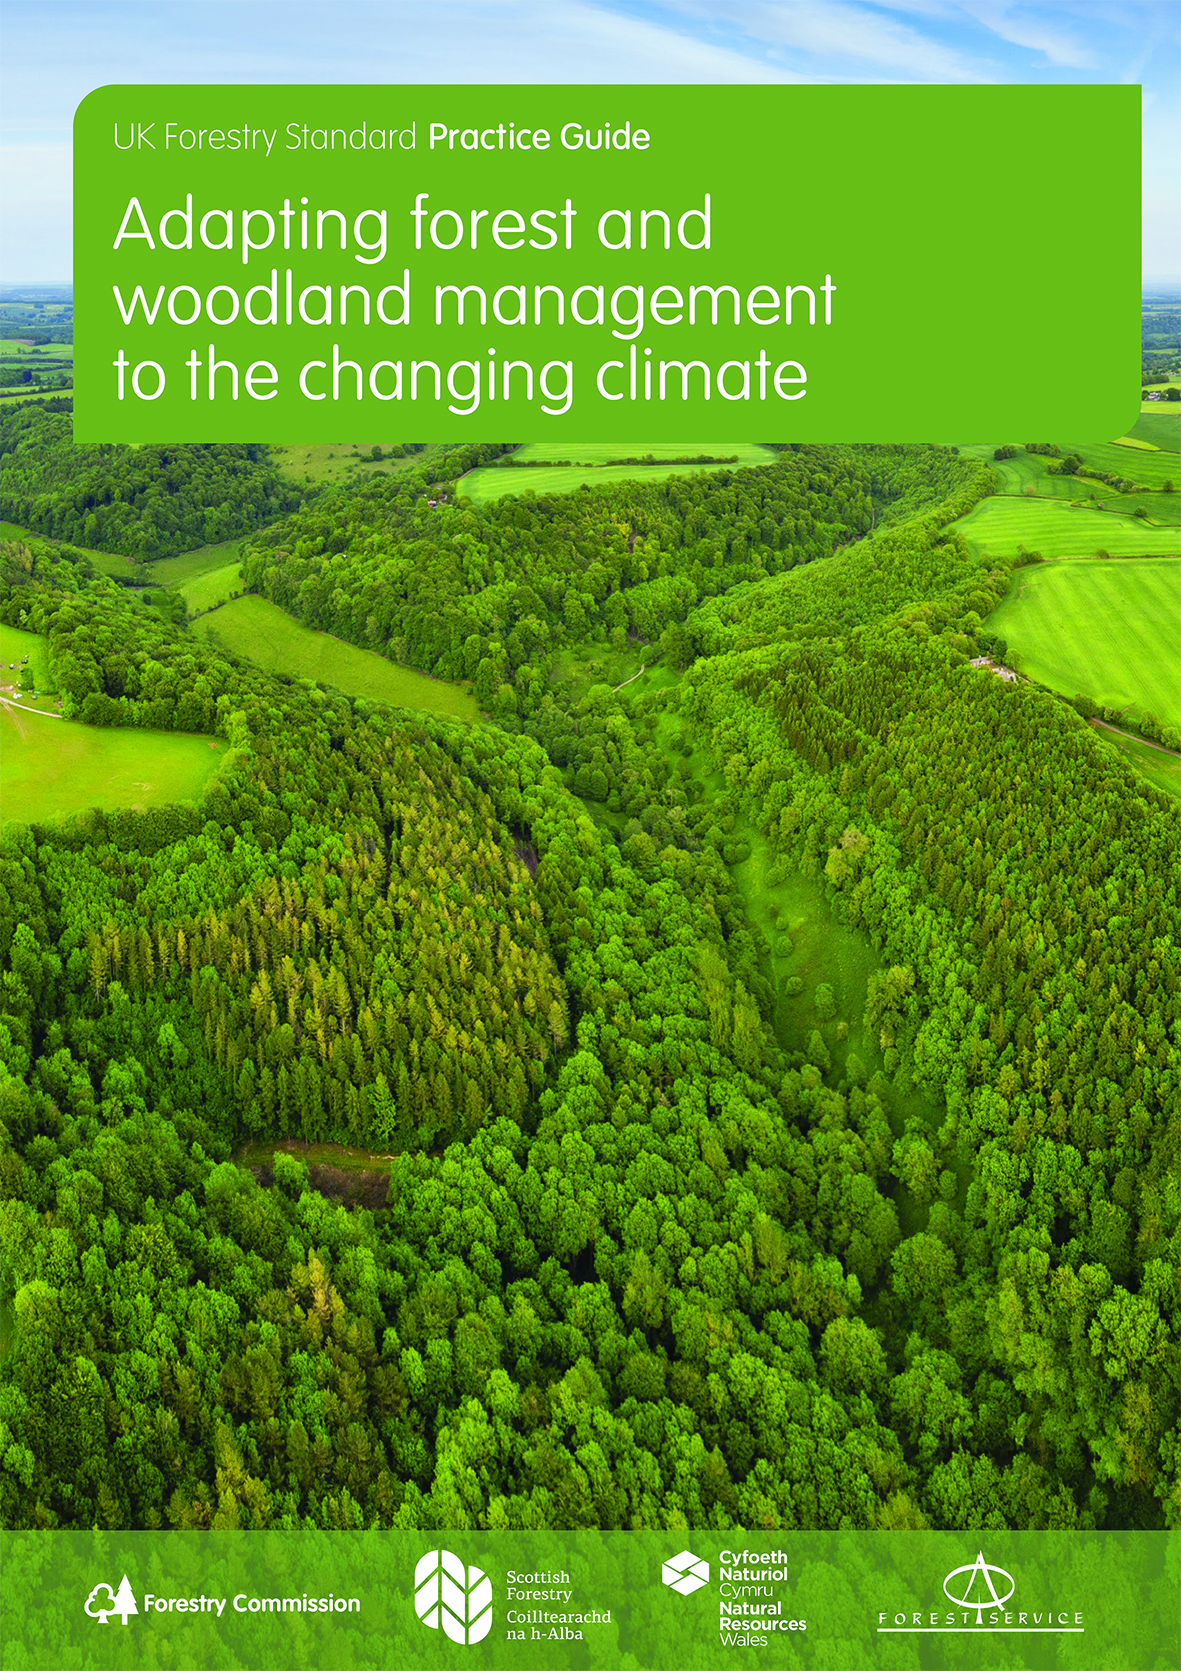 Adapt your woodlands now for climate change